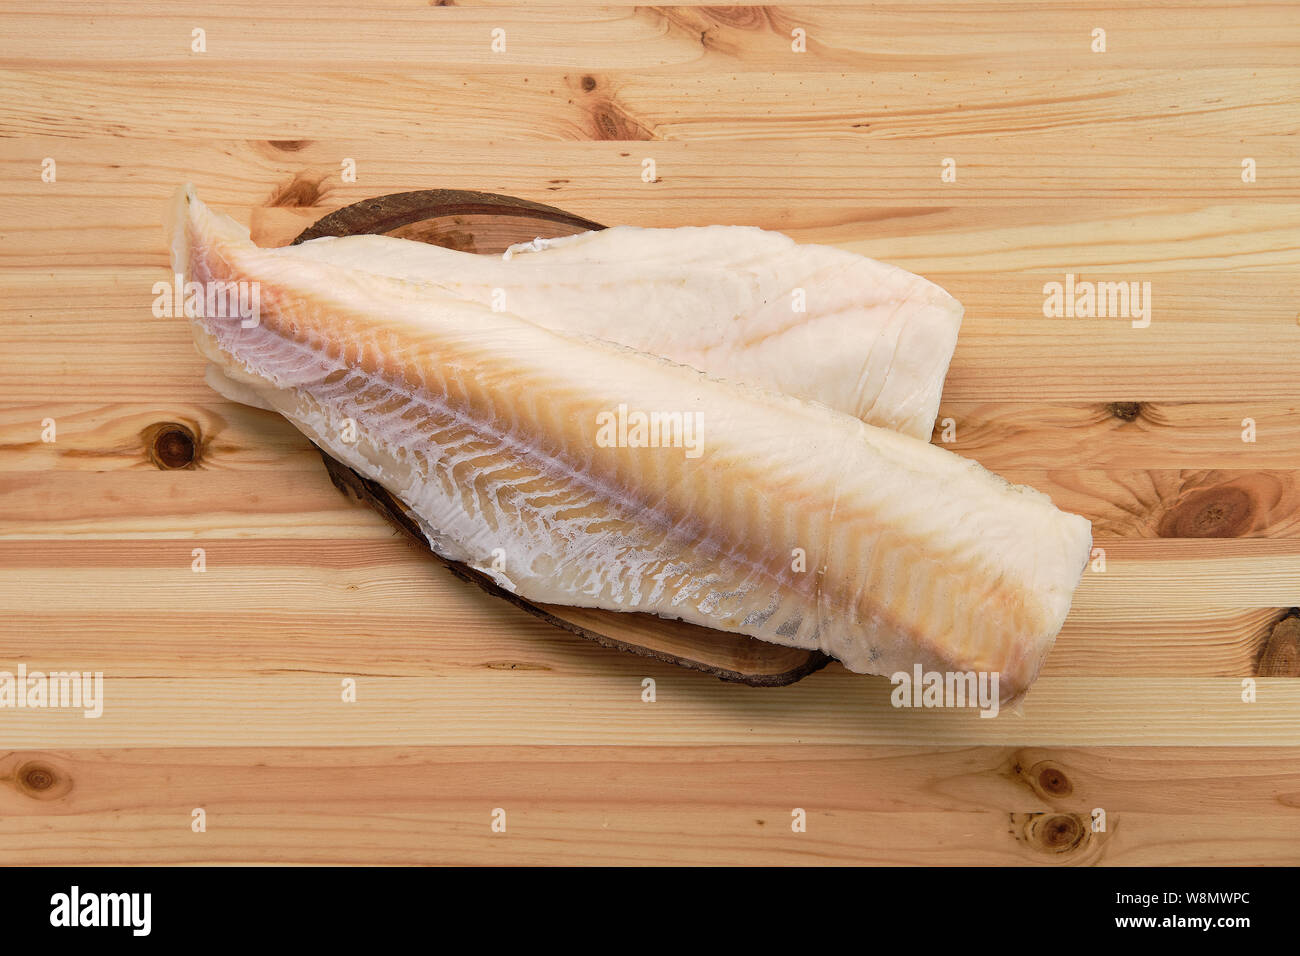 Frozen fillet of cod on wooden table Stock Photo